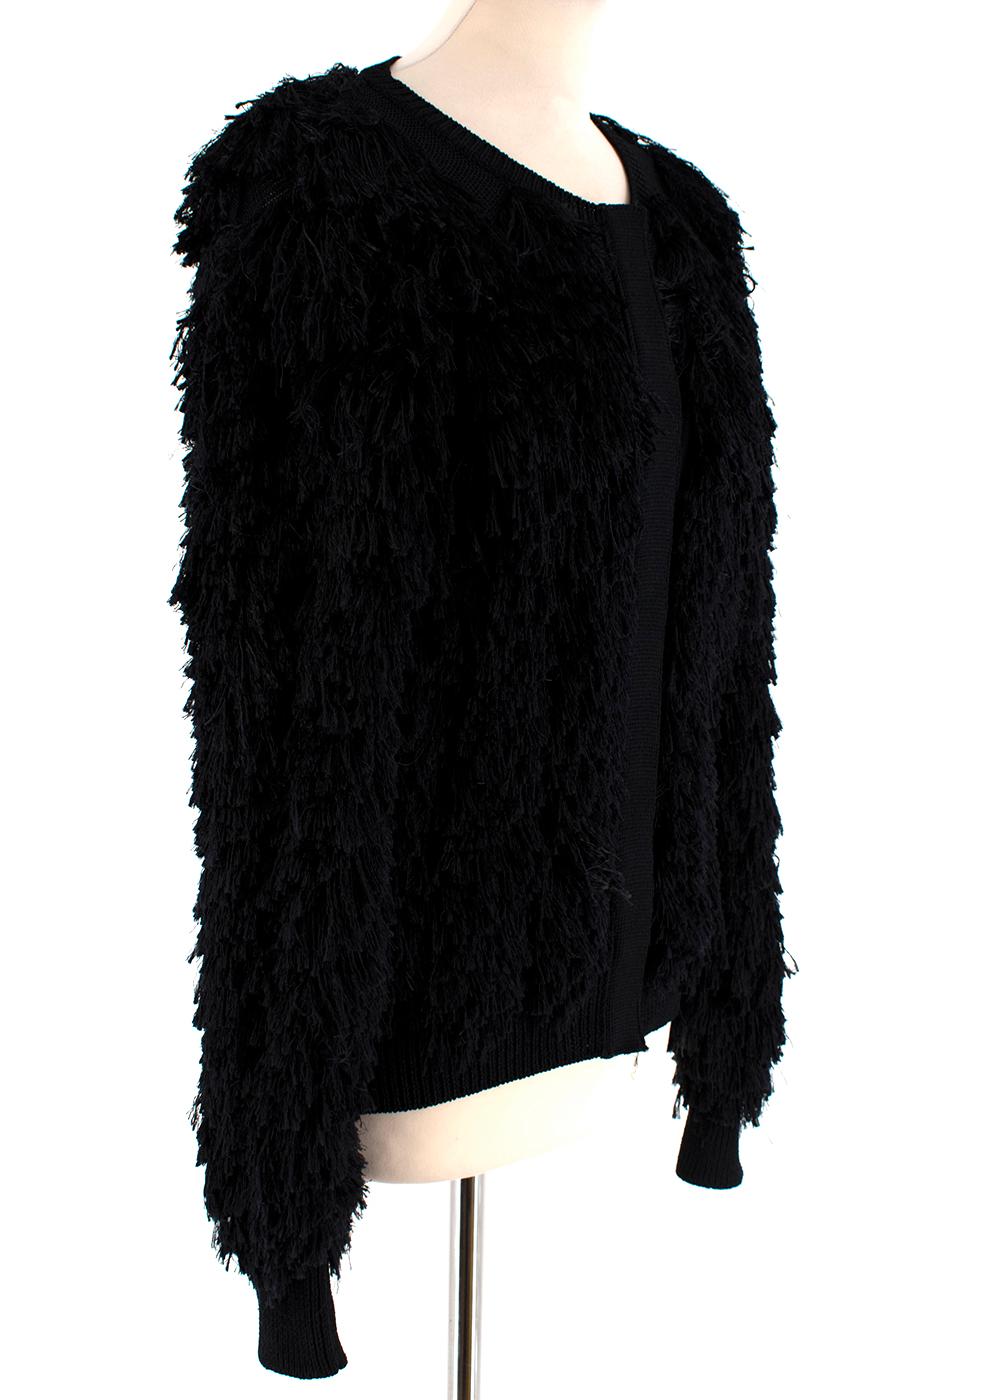 Tom Ford Black SIlk Blend Fringed Cardigan

-Black fringe cardigan
-Hidden button detail
-Materials : 68% Silk 24% Viscose 8% Polyester
-Made in Italy

Measurements are taken with the item lying flat, seam to seam.
Length - 61cm
Shoulder -